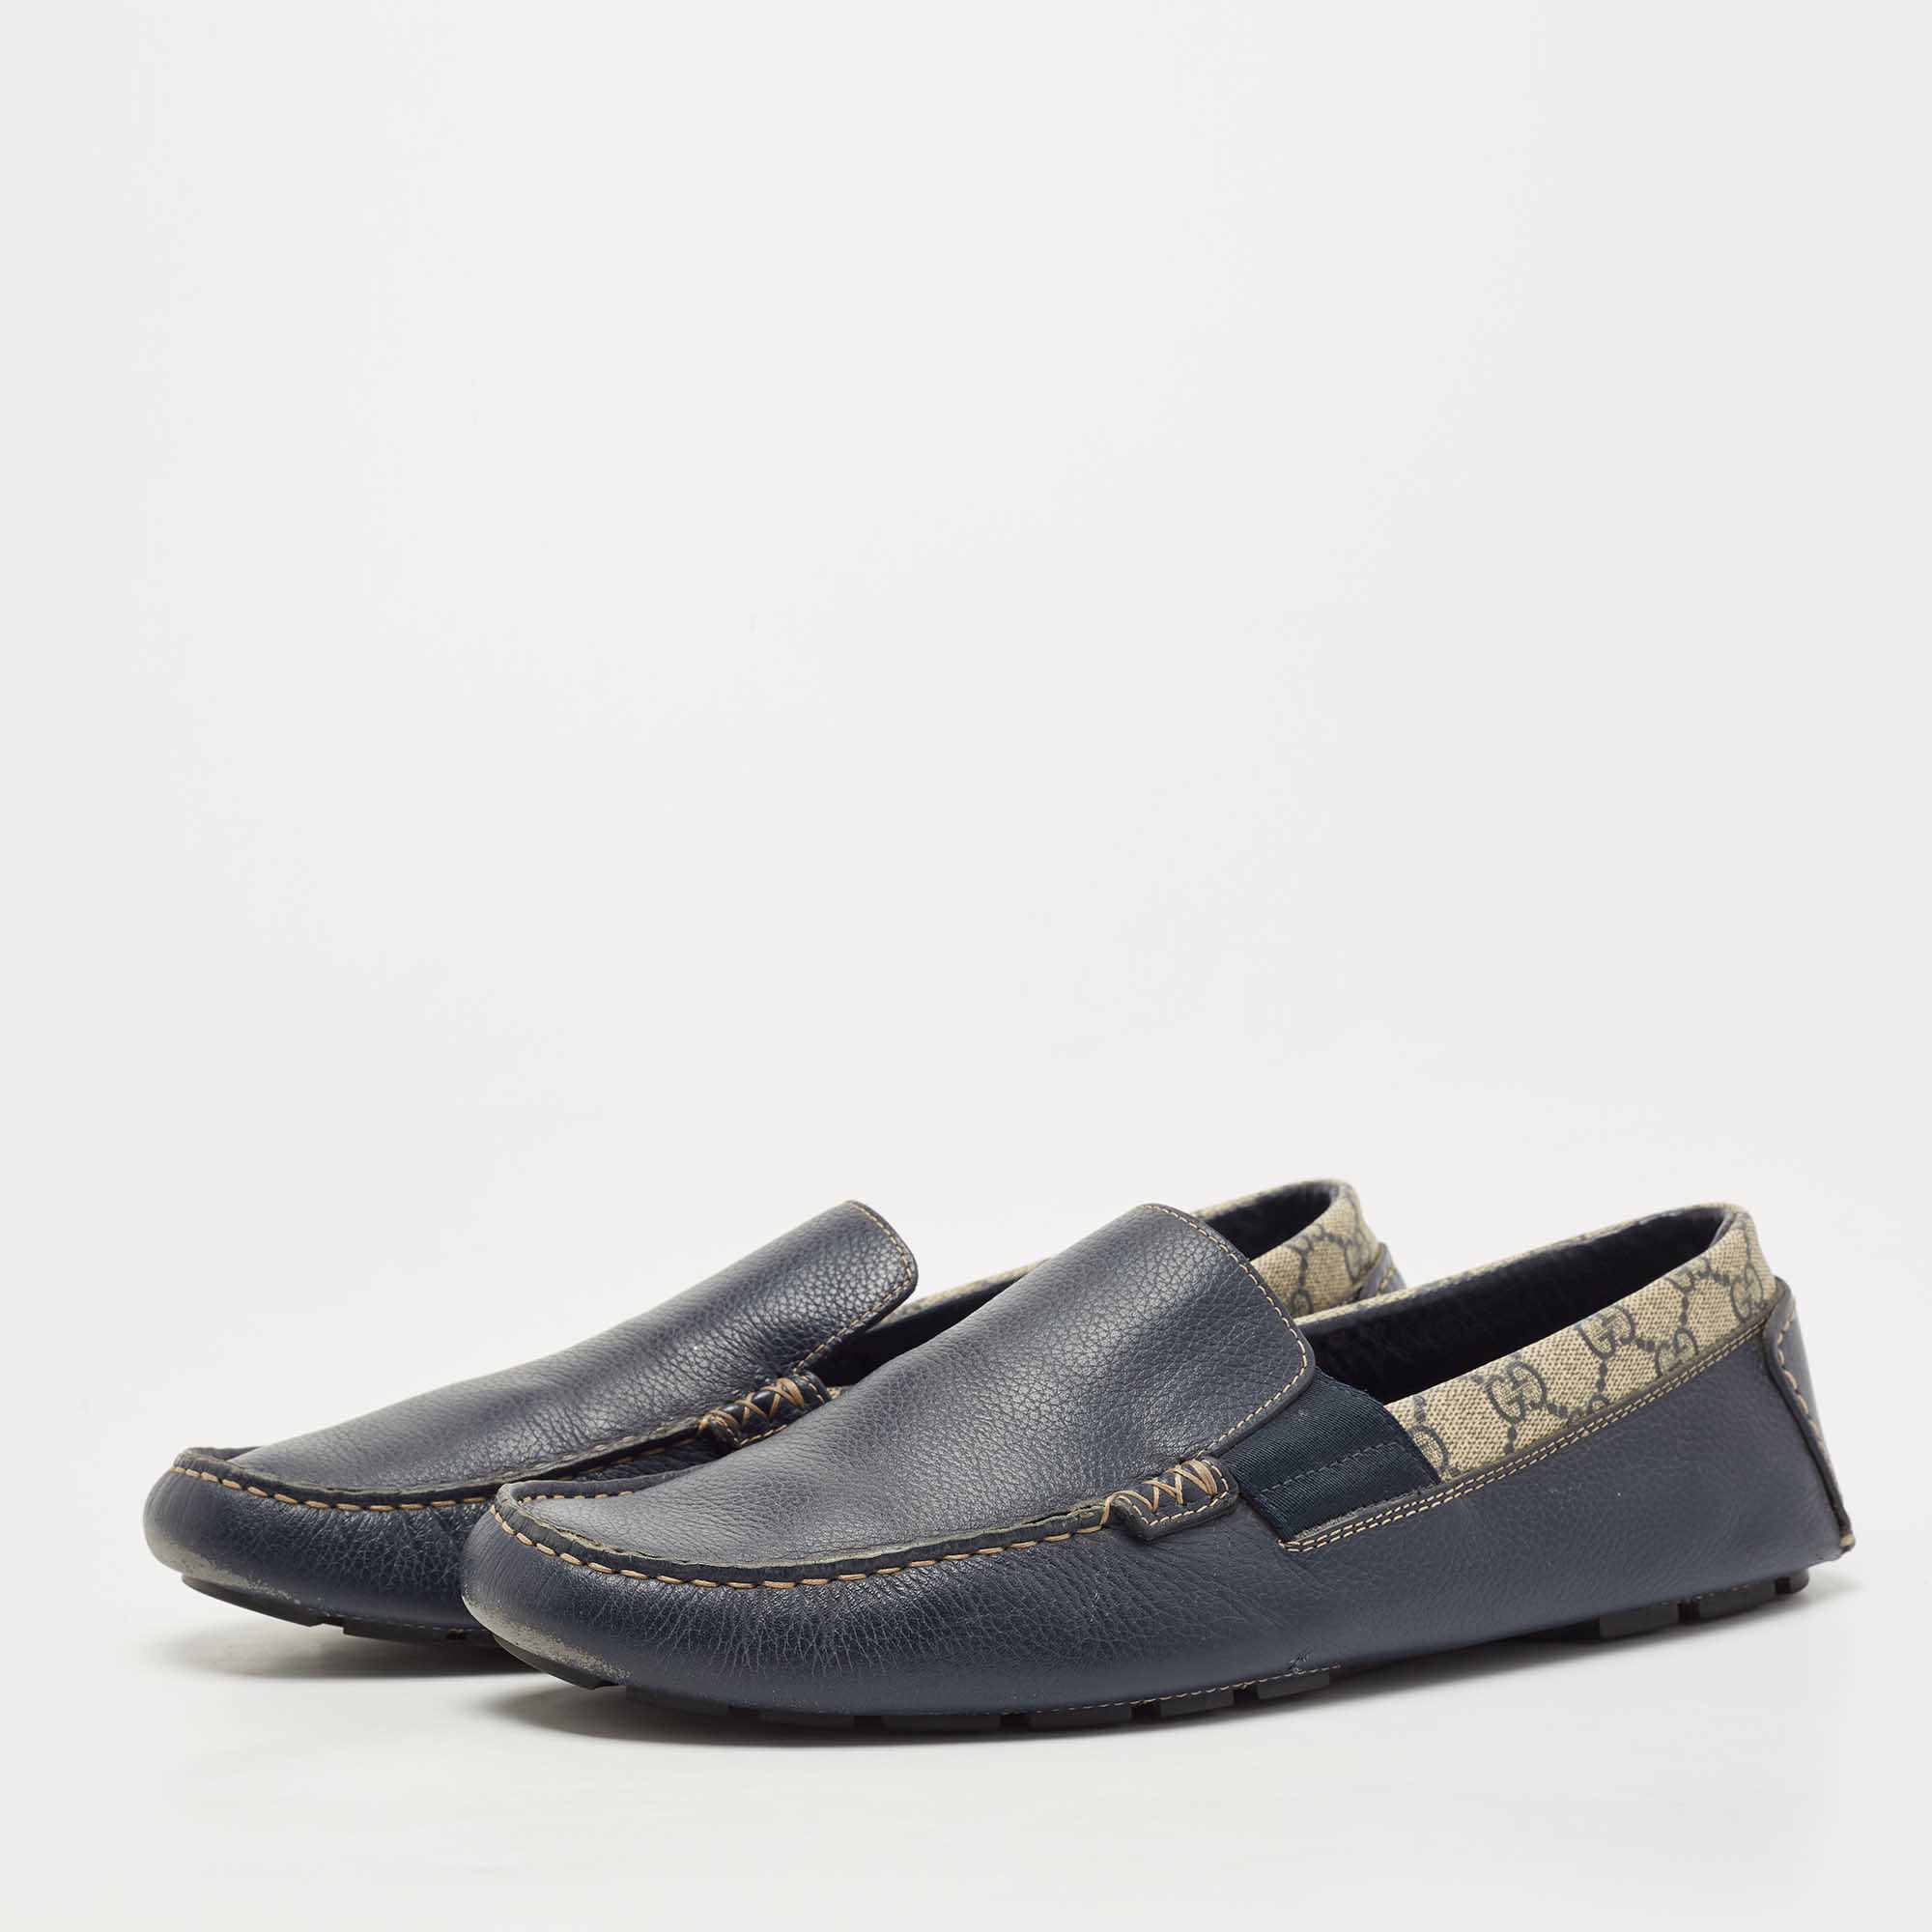 

Gucci Navy Blue/Beige Leather and GG Supreme Canvas Slip On Loafers Size